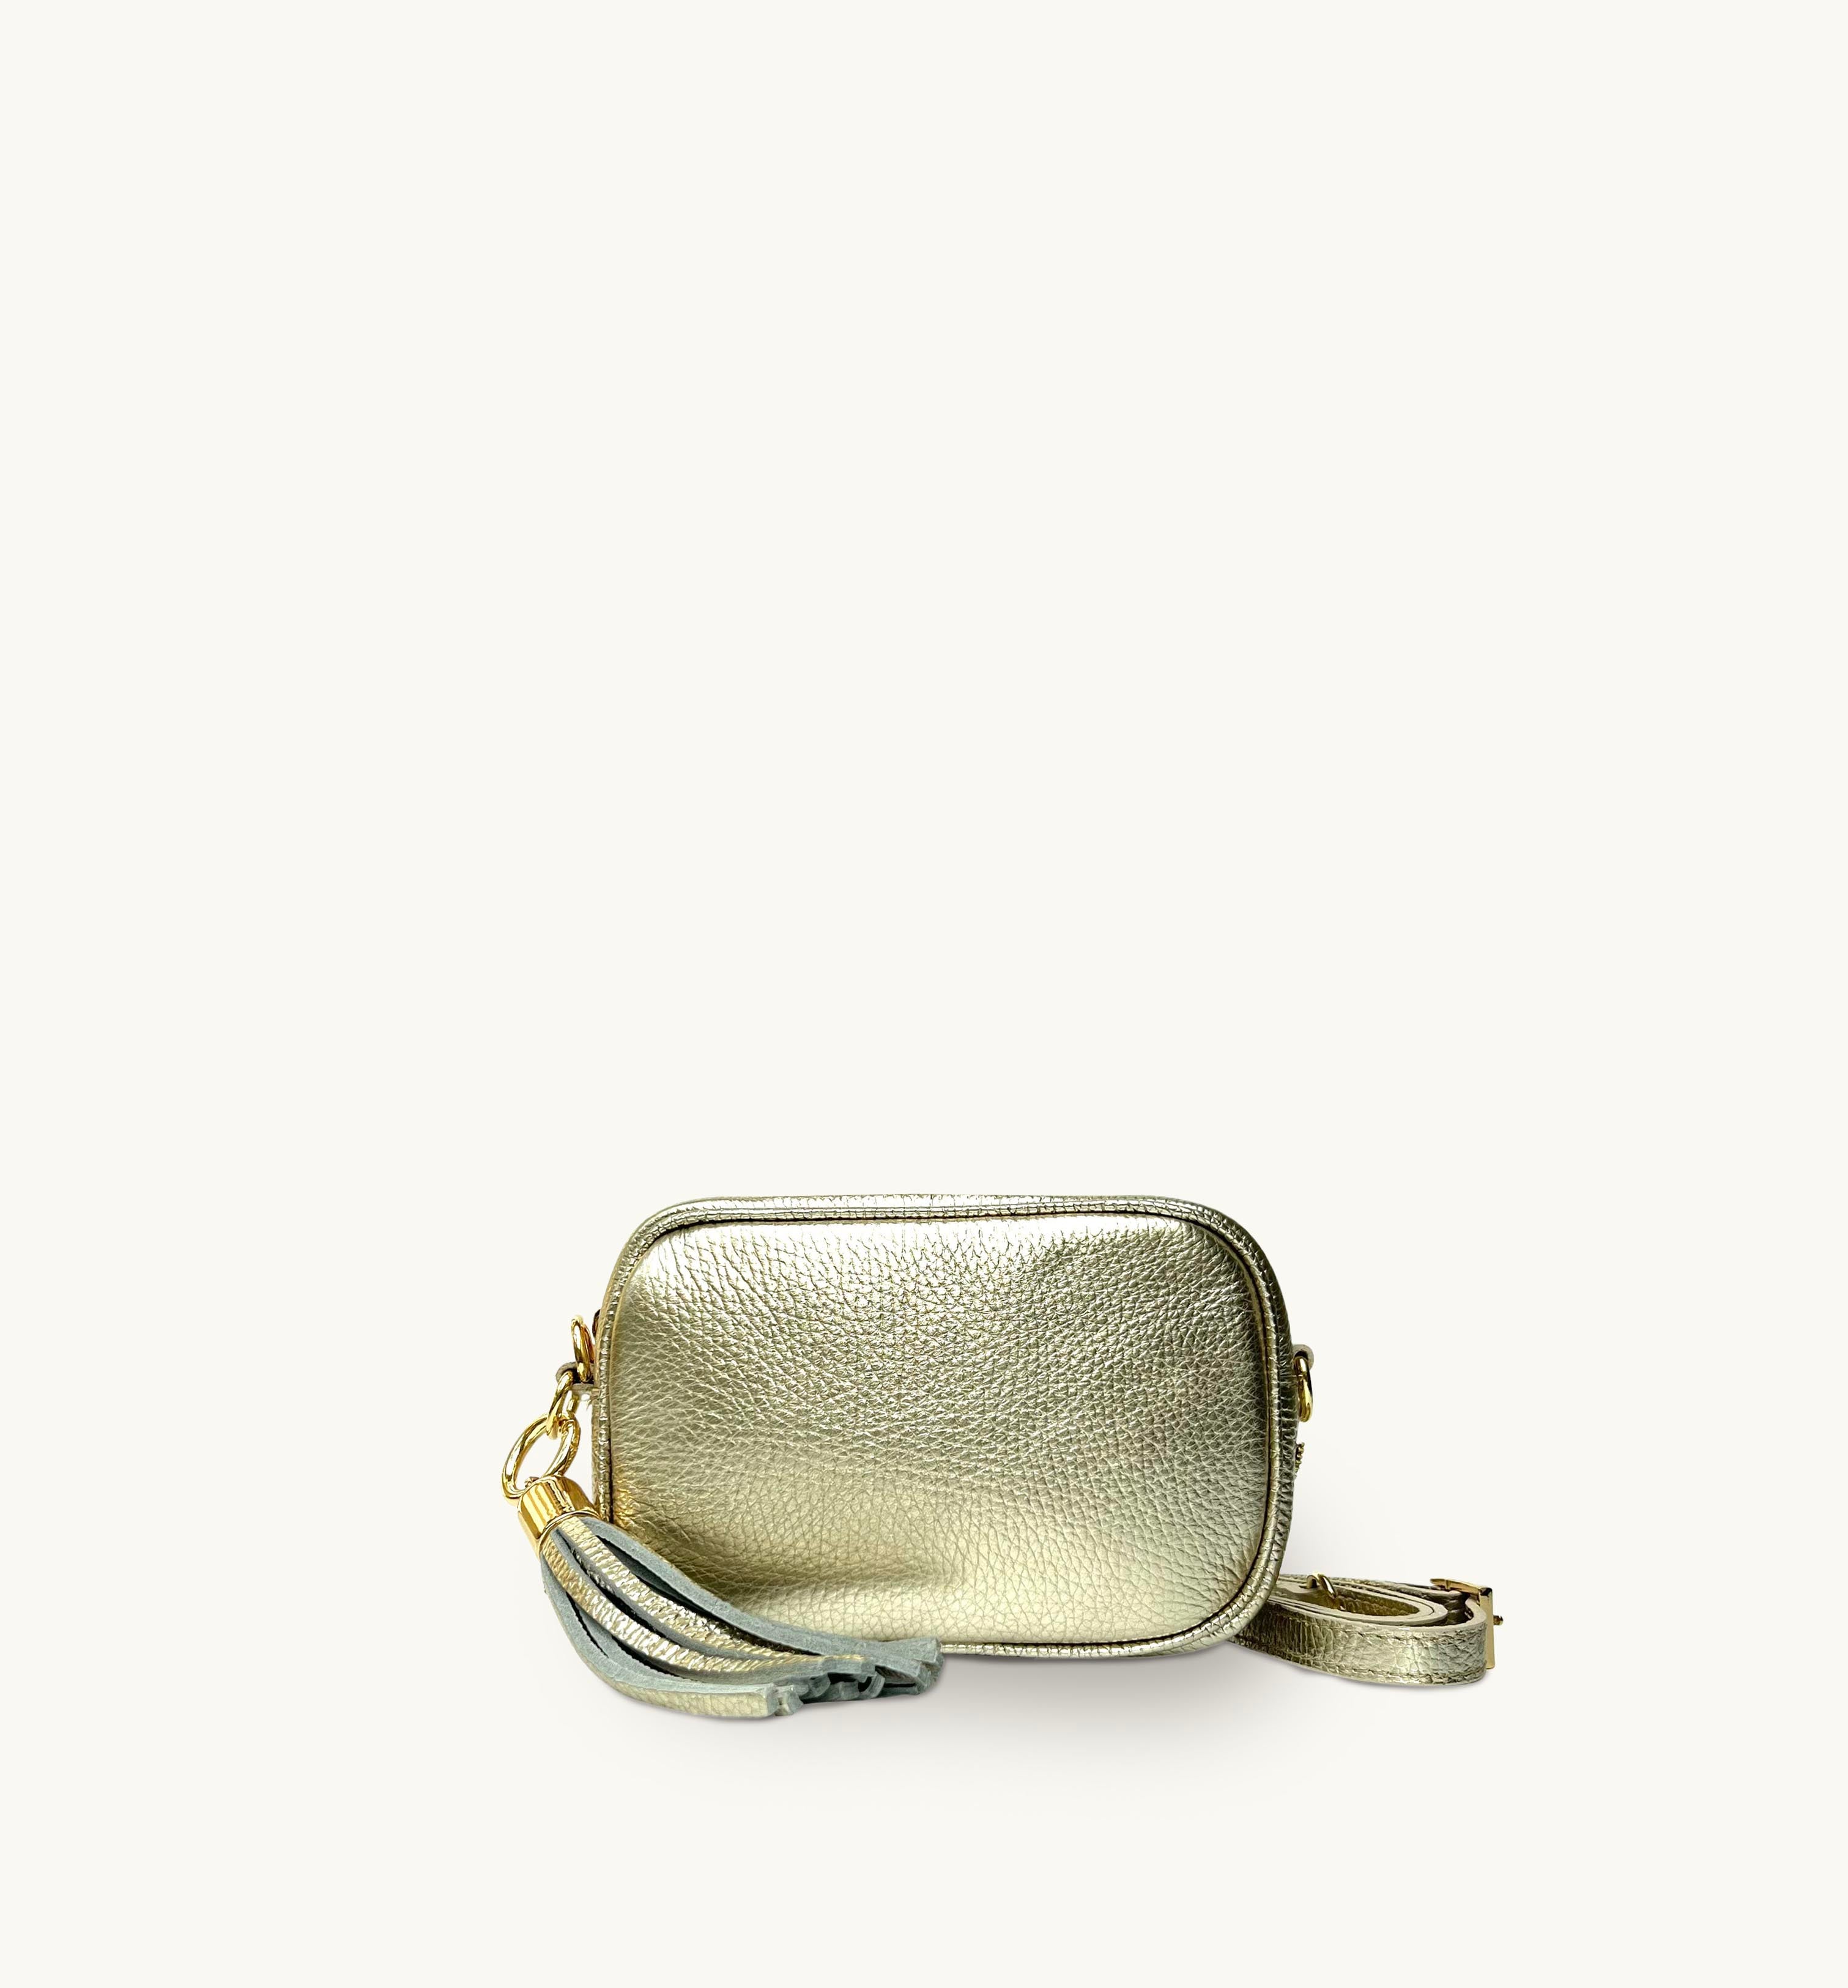 The Mini Tassel Gold Leather Phone Bag With Pale Pink Leopard Strap